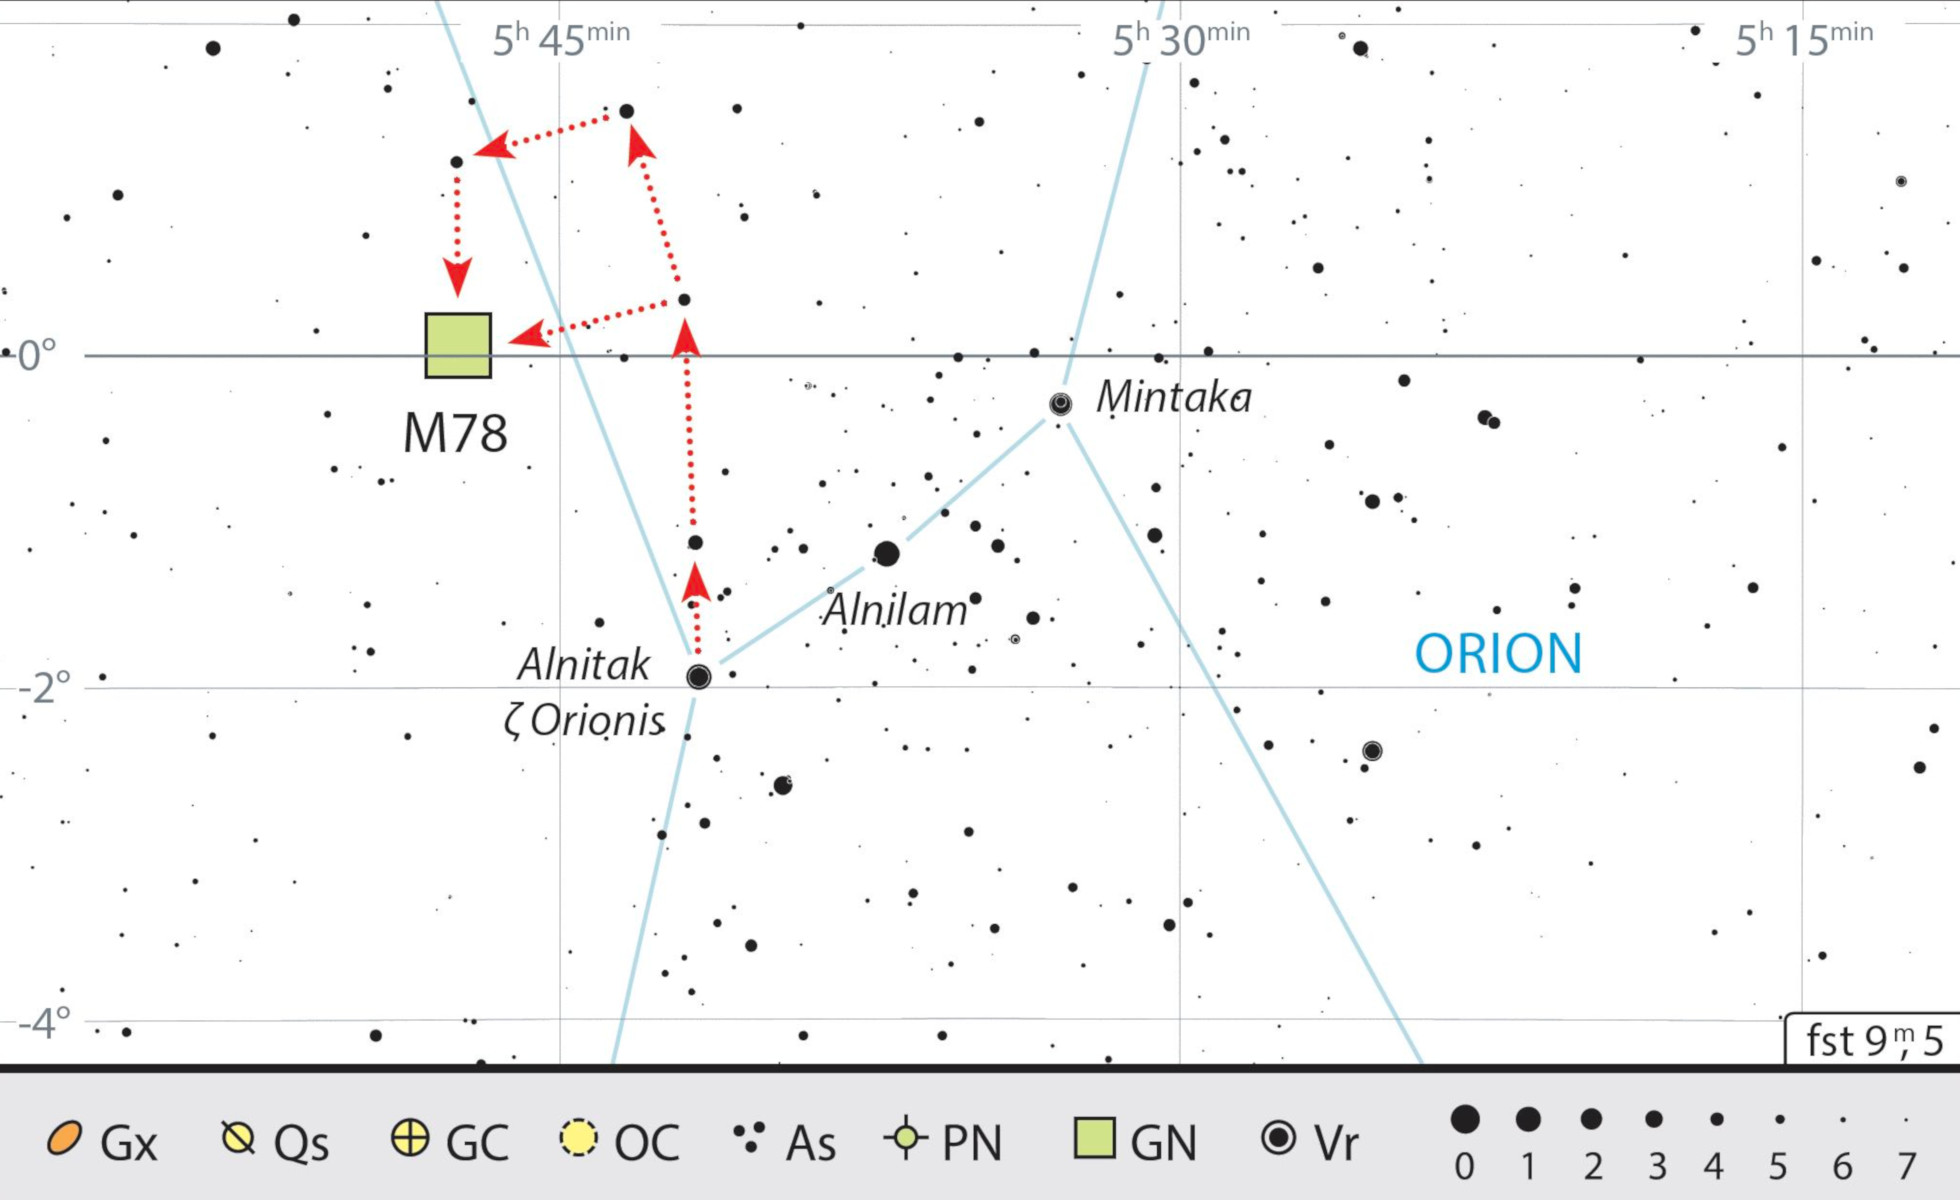 Finding chart of M78 in Orion. J. Scholten